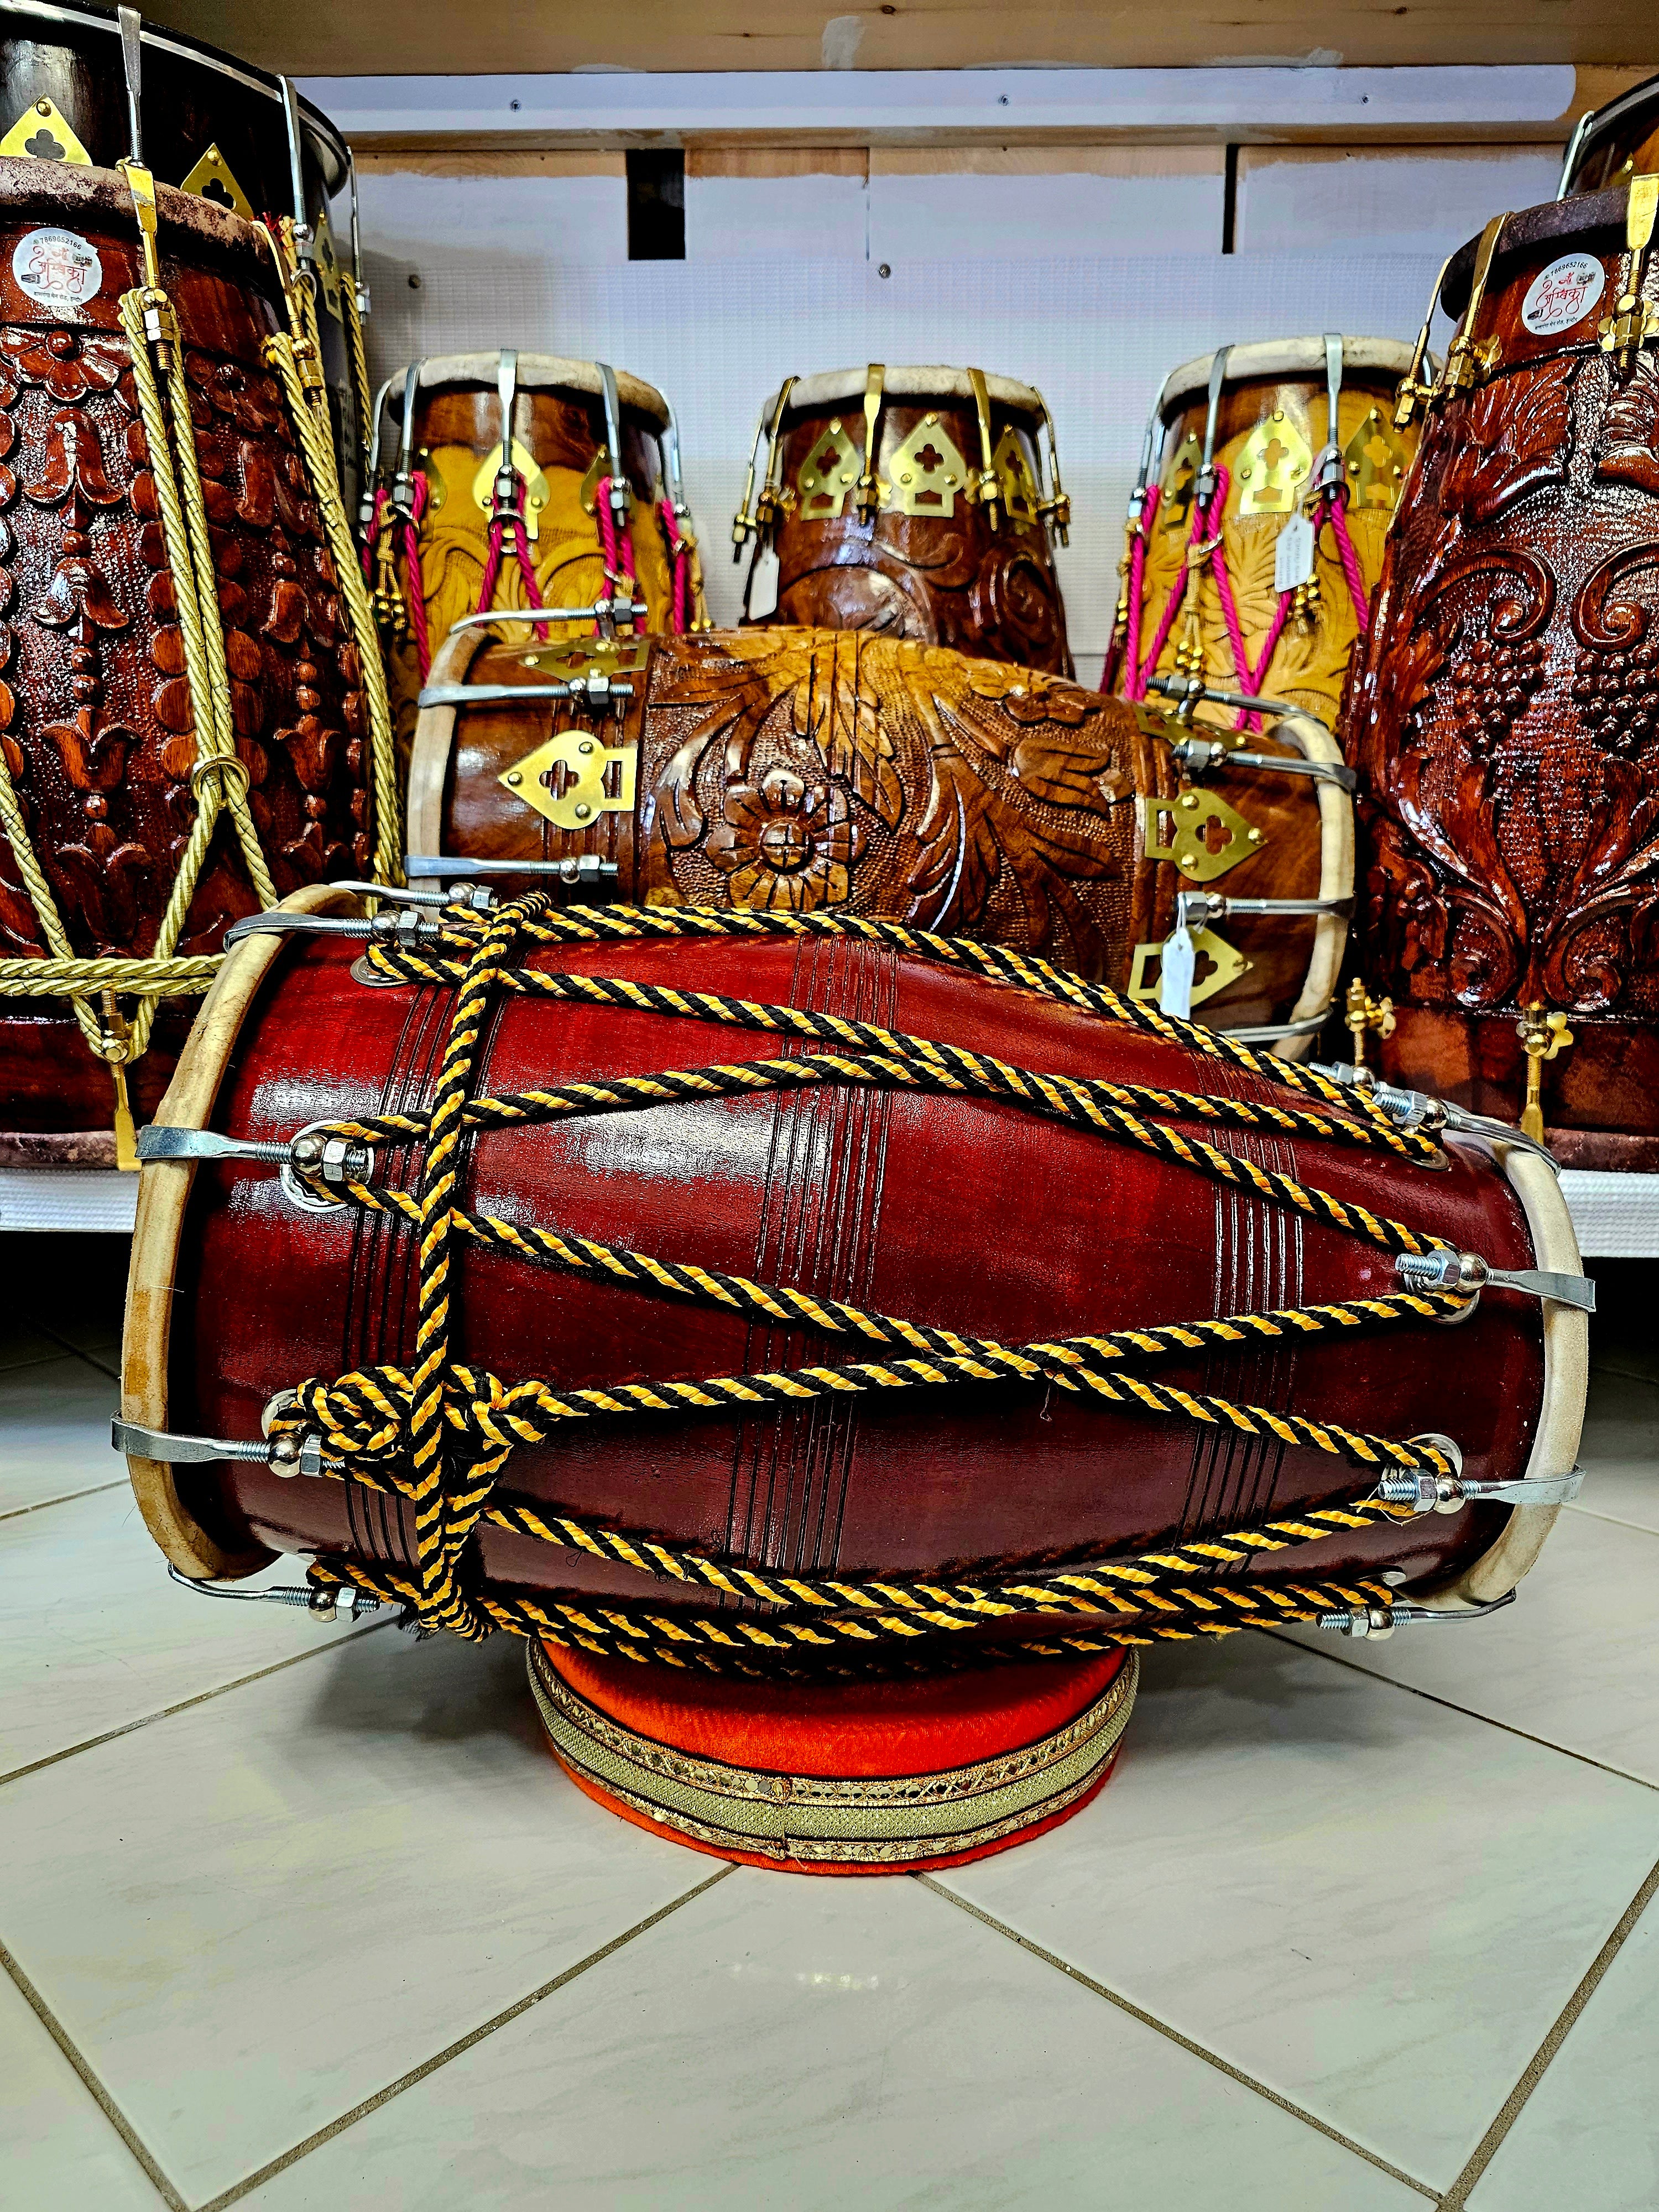 The HoneyComb Harmony Dholak - A Burgundy Professional Mango Wood Dholak with Yellow and Black Ropes, Chrome Bolts, and a Handle!